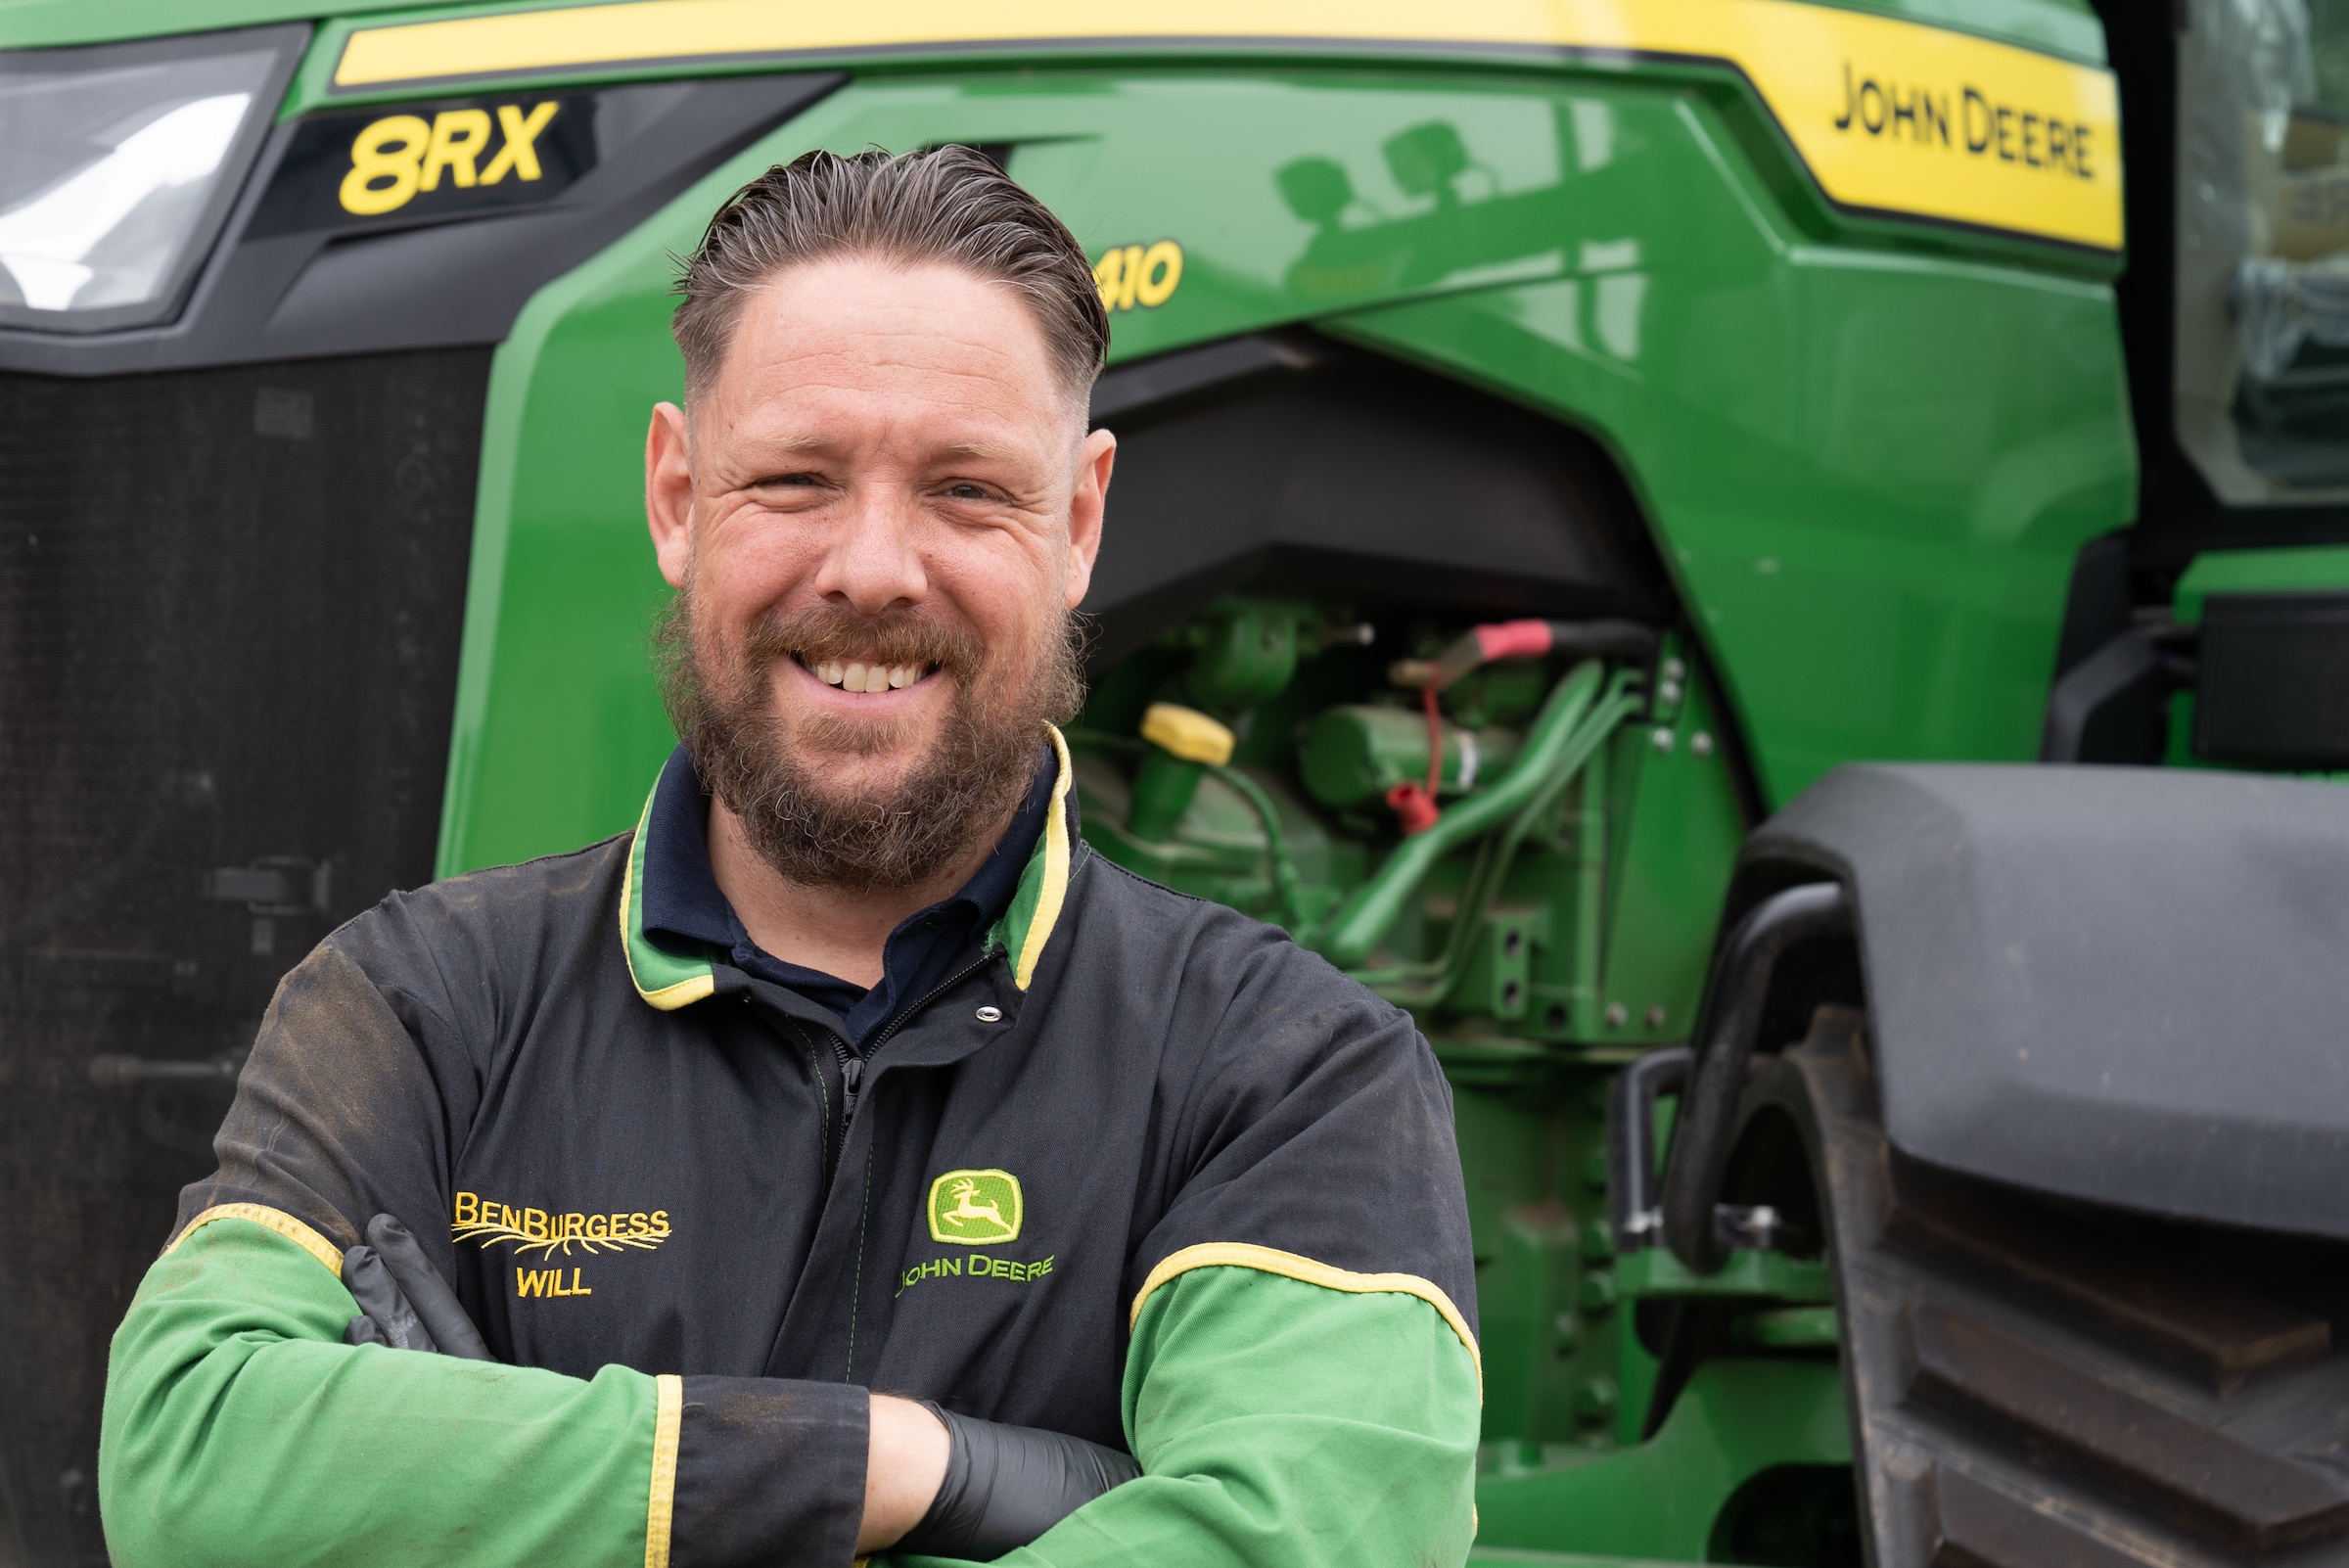 John Deere announces online careers event targeted at military service leavers